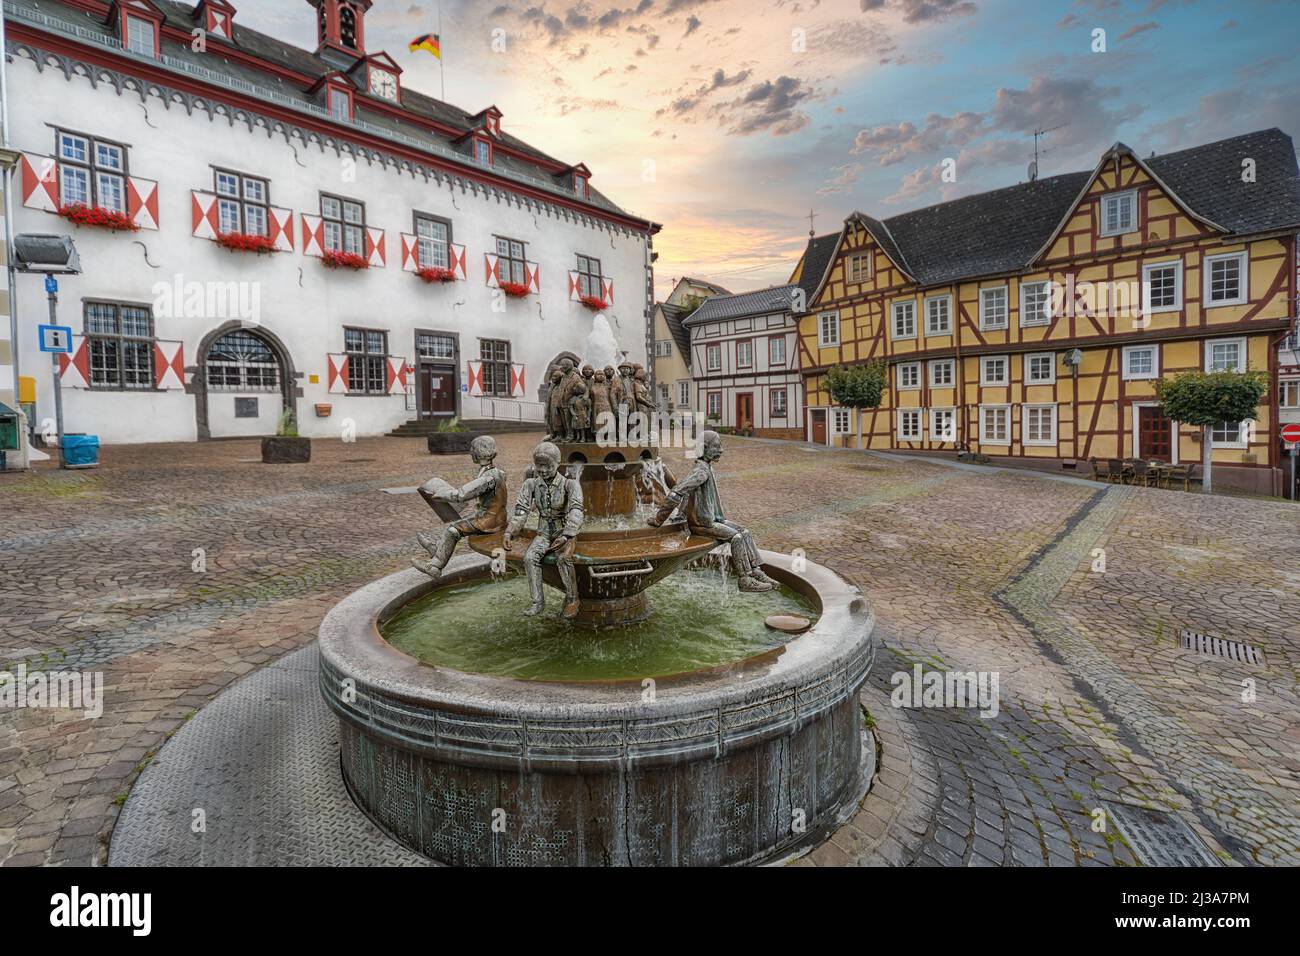 Fountain made of copper in the middle of the old marketplace with half-timbered houses and the town hall in the background in Linz am Rhein, Germany. Stock Photo